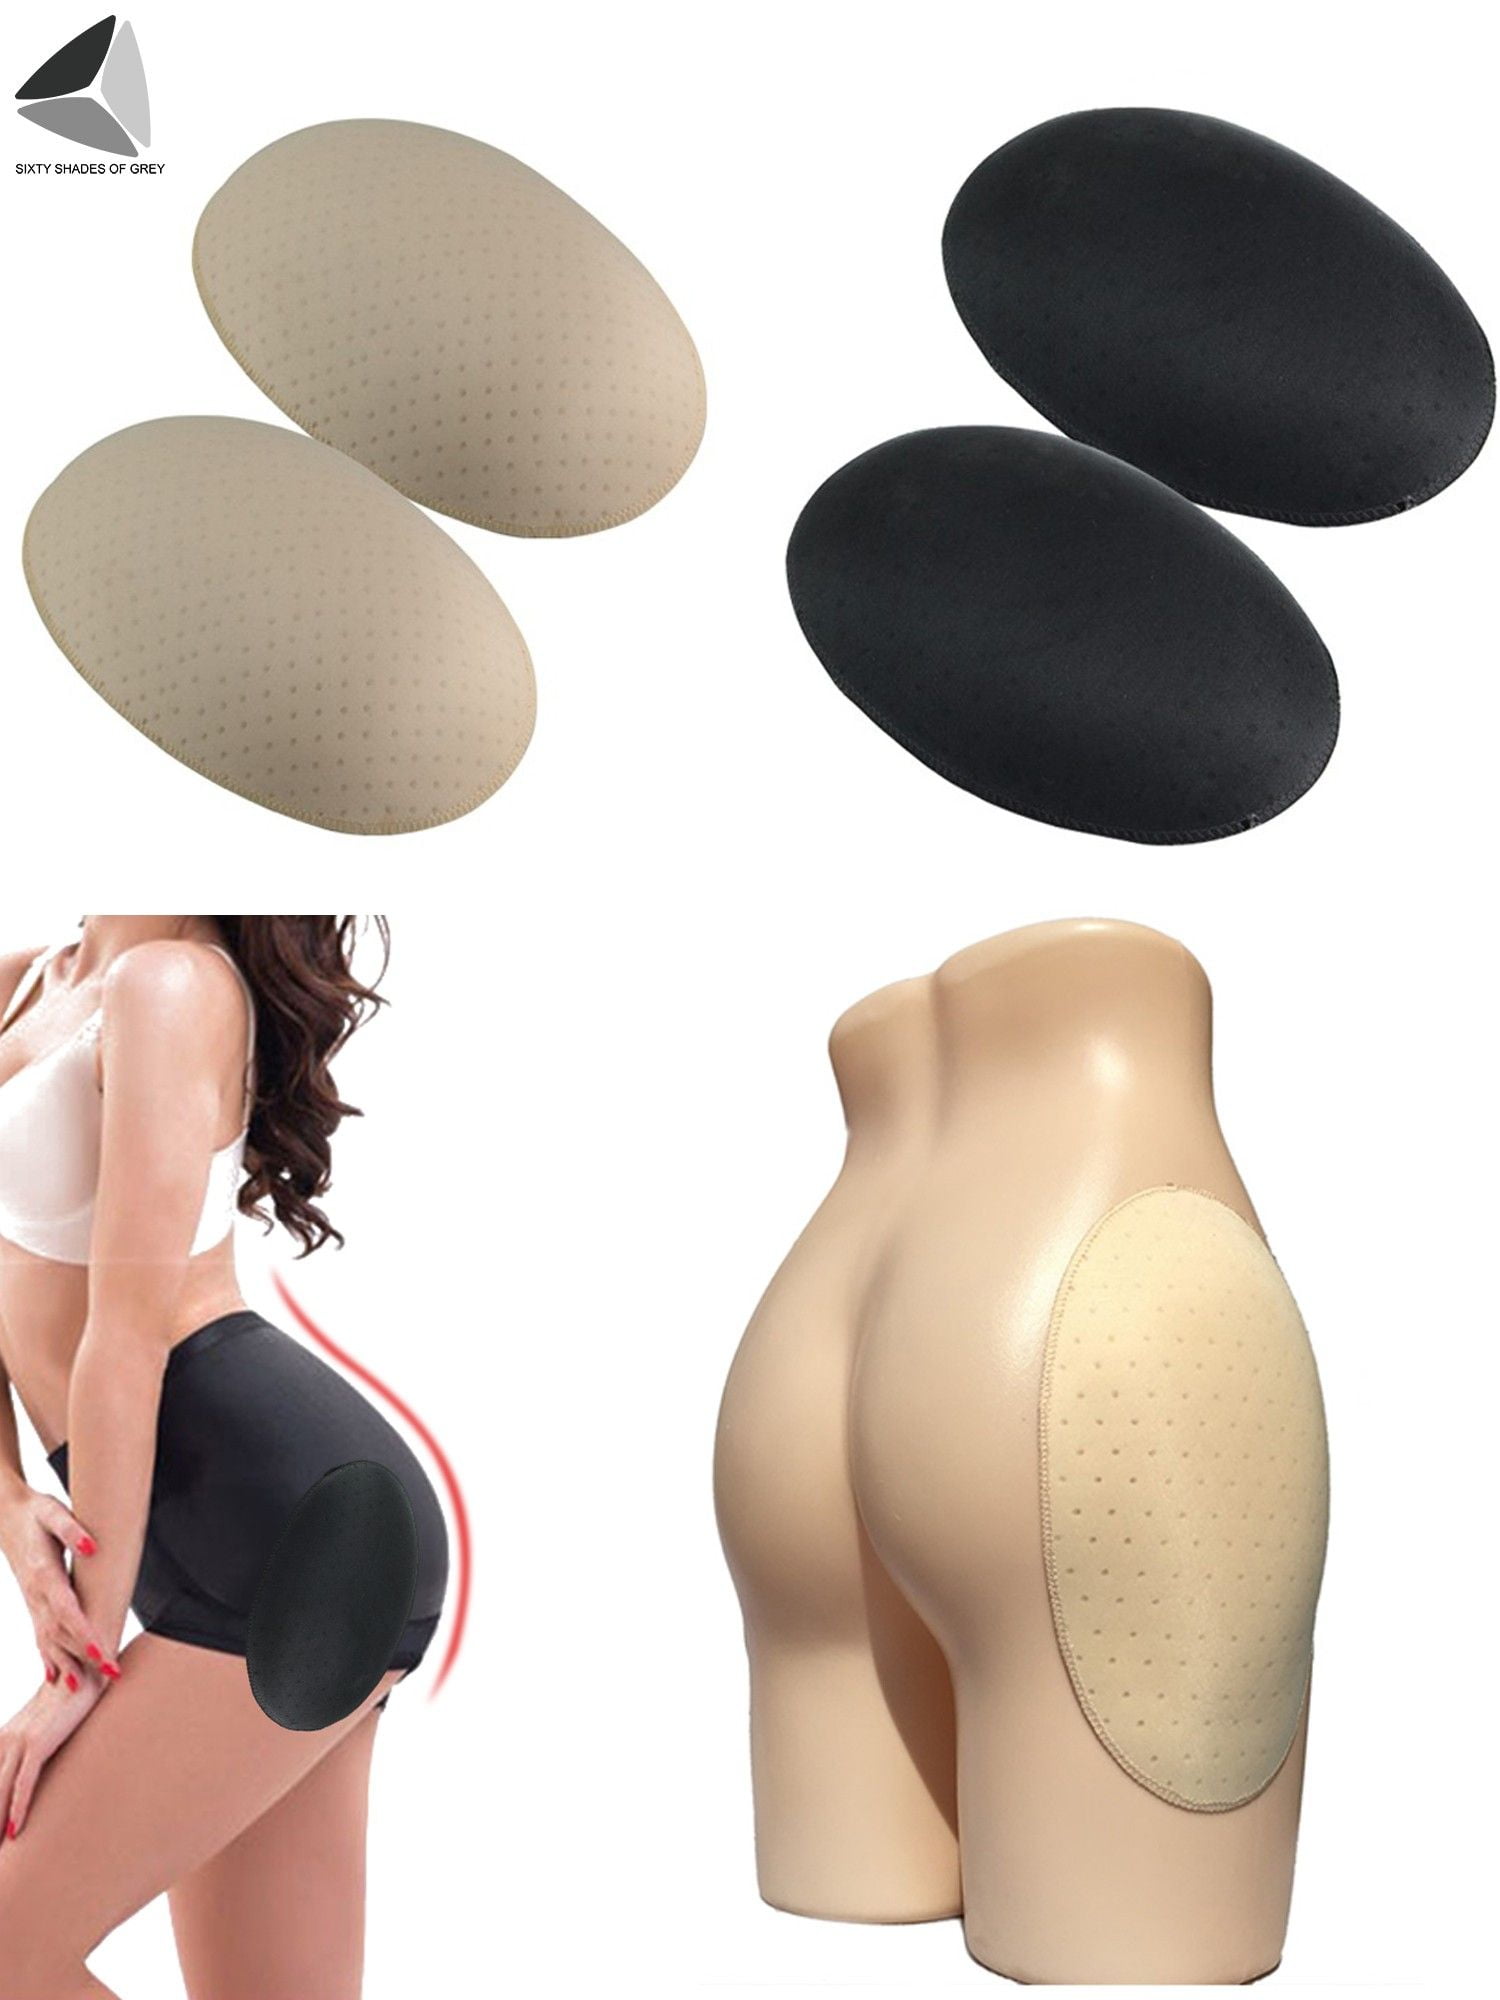 PULLIMORE 2 Pairs Women Enhancing Underwear Pad Stickers Hip Up Padded Butt  Lifter Bum Shapewear (L, Black) 